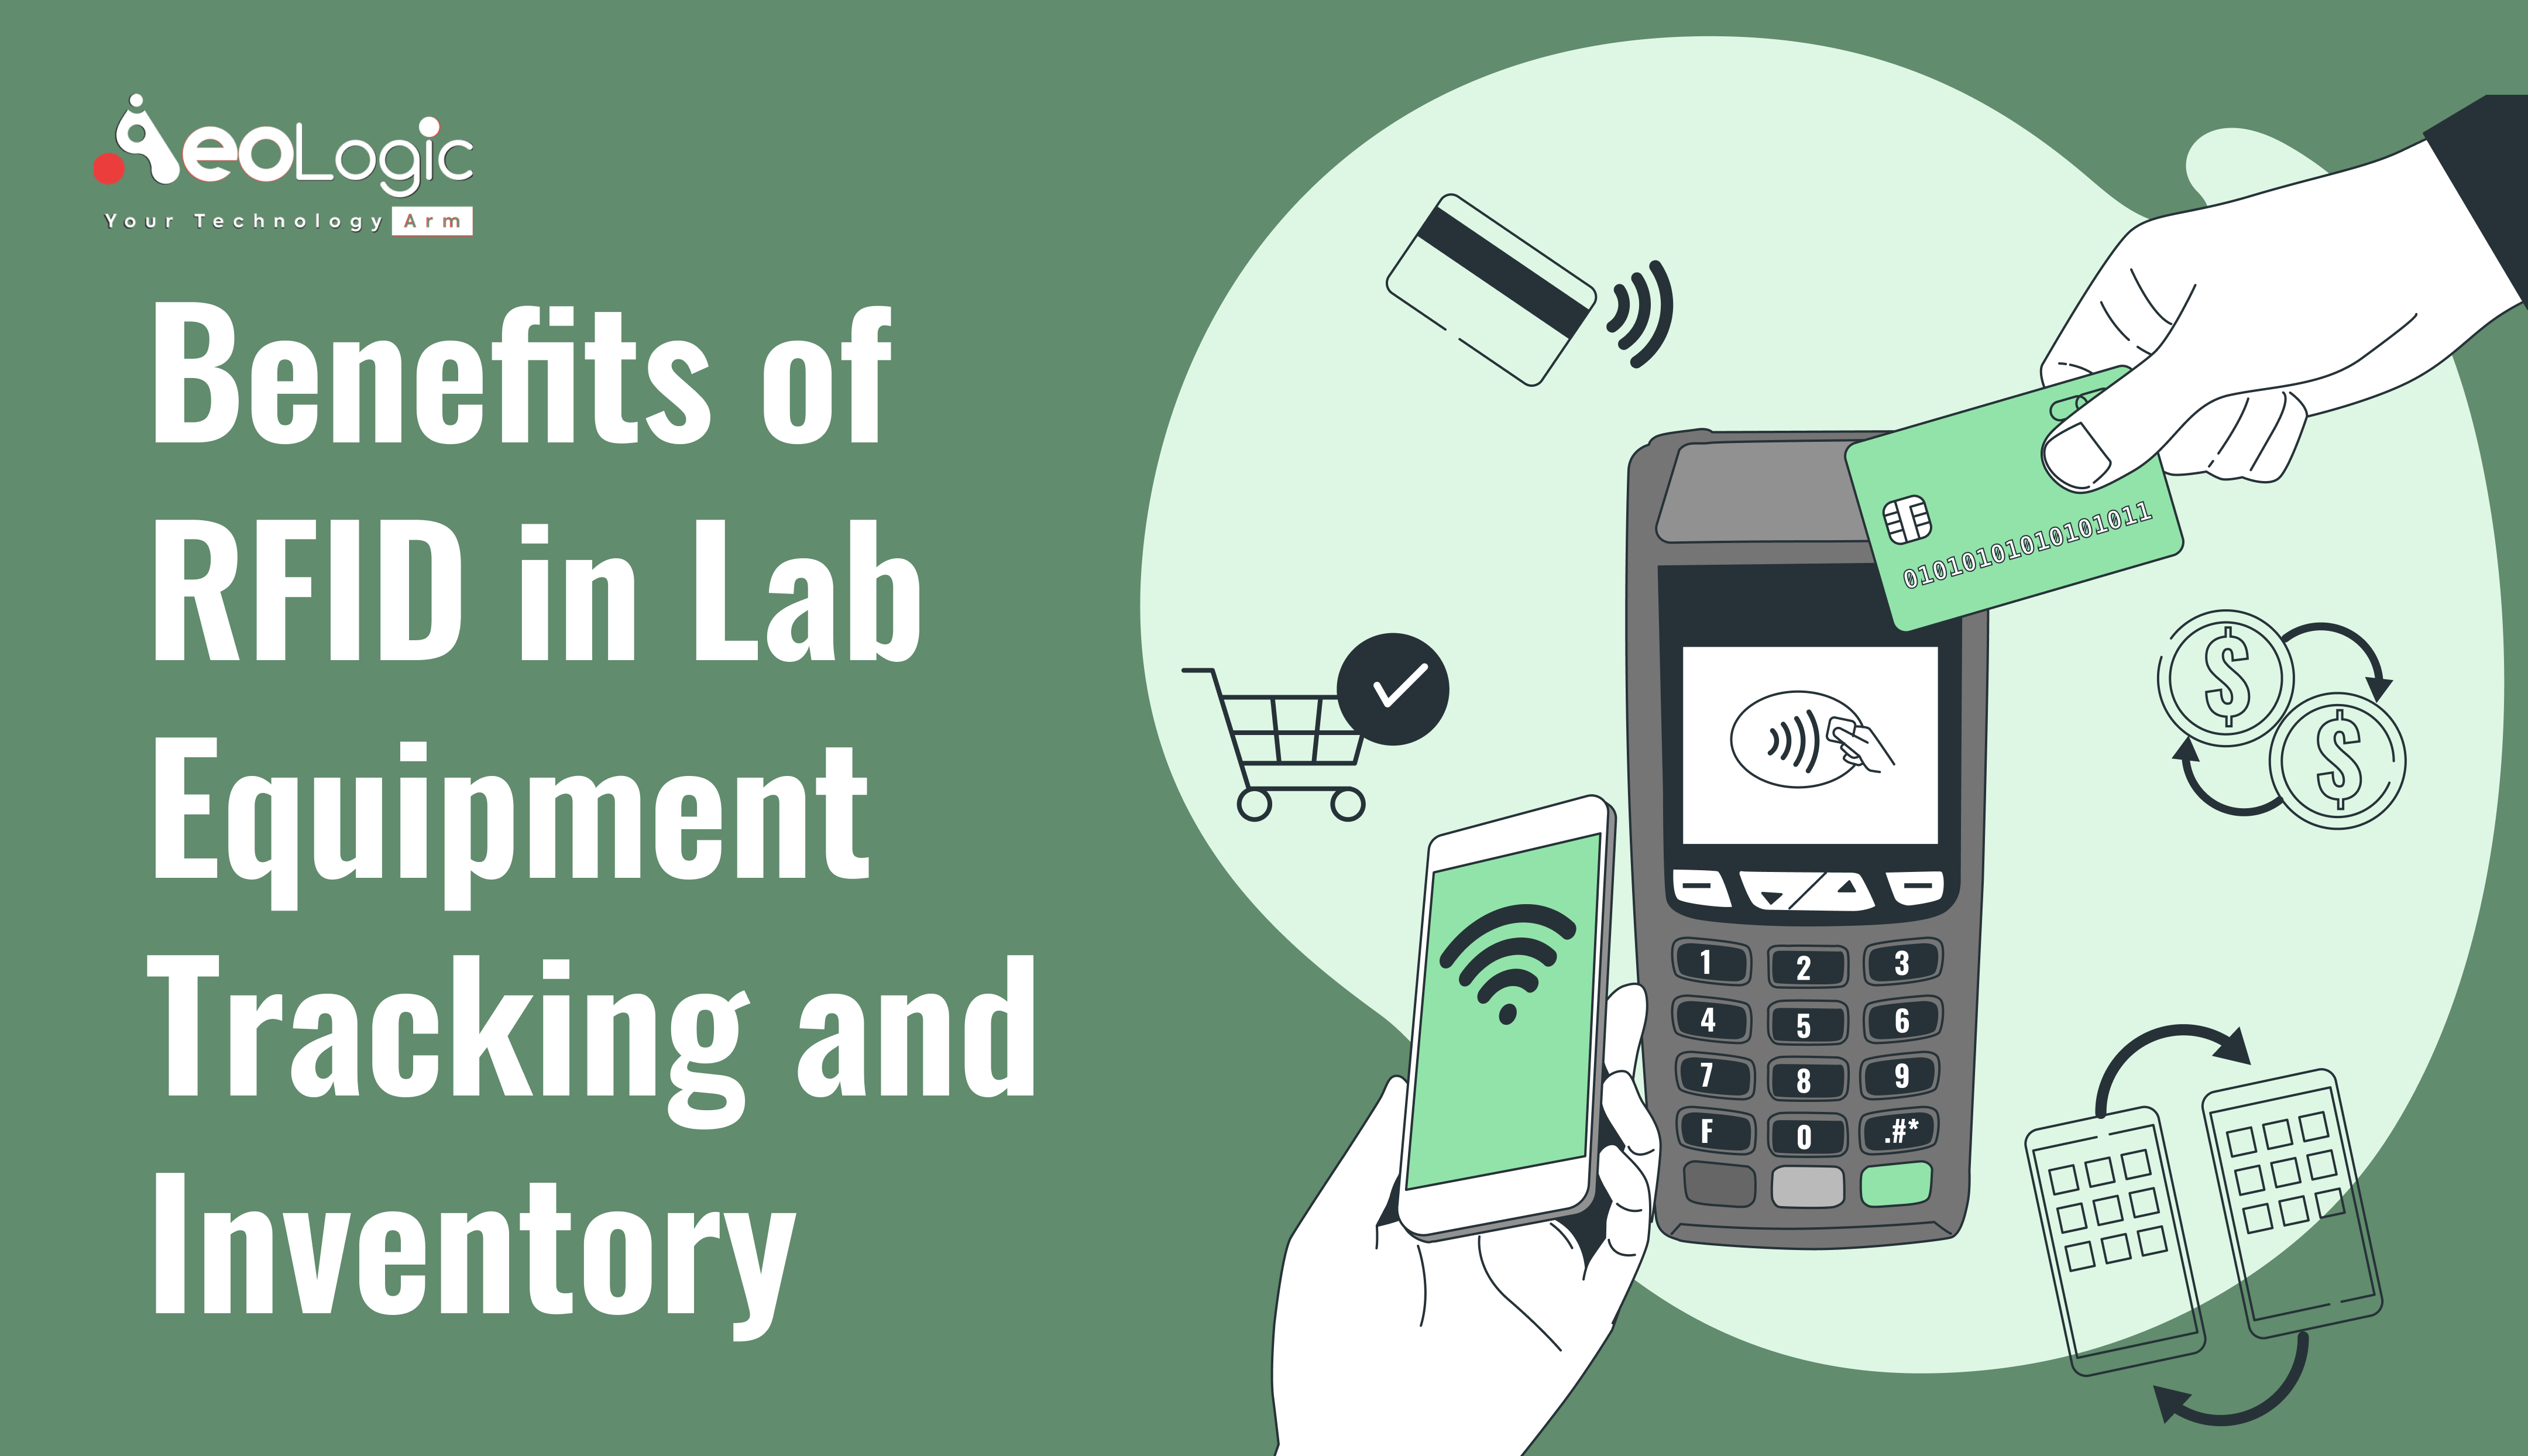 Benefits of RFID in Lab Equipment Tracking and Inventory